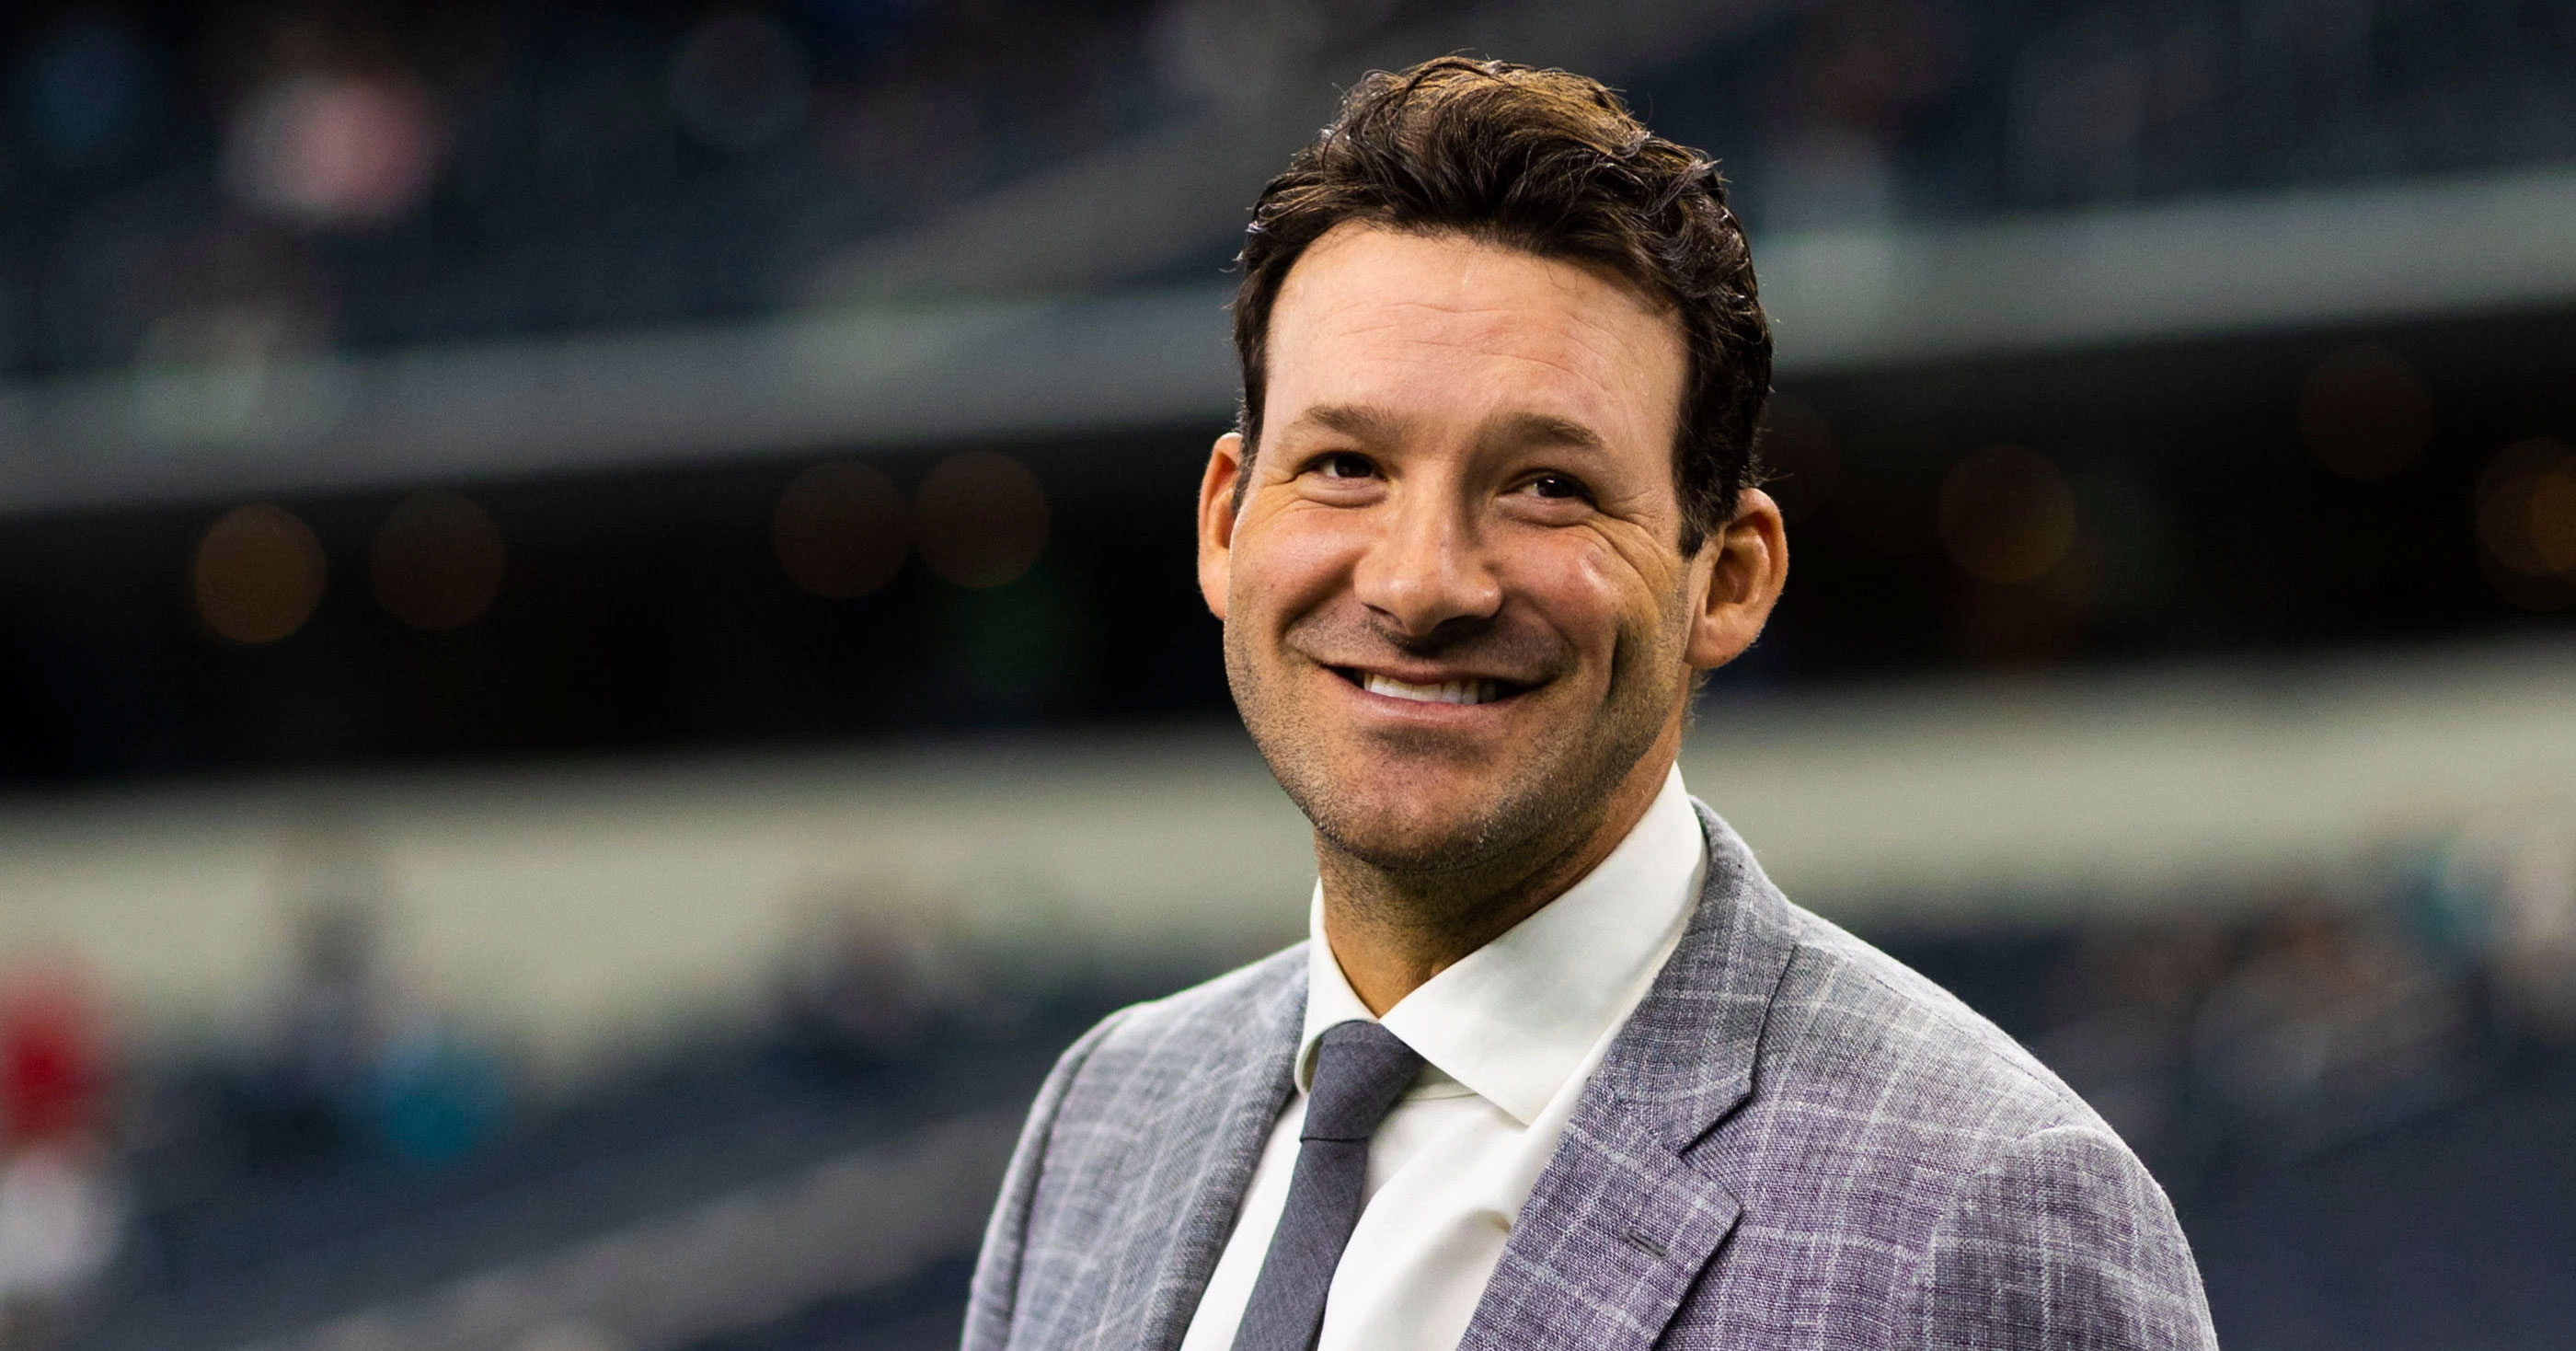 REPORT: Tony Romo Wants Richest Contract For Sports Analyst Ever ($10 Million Per Year) To Stay